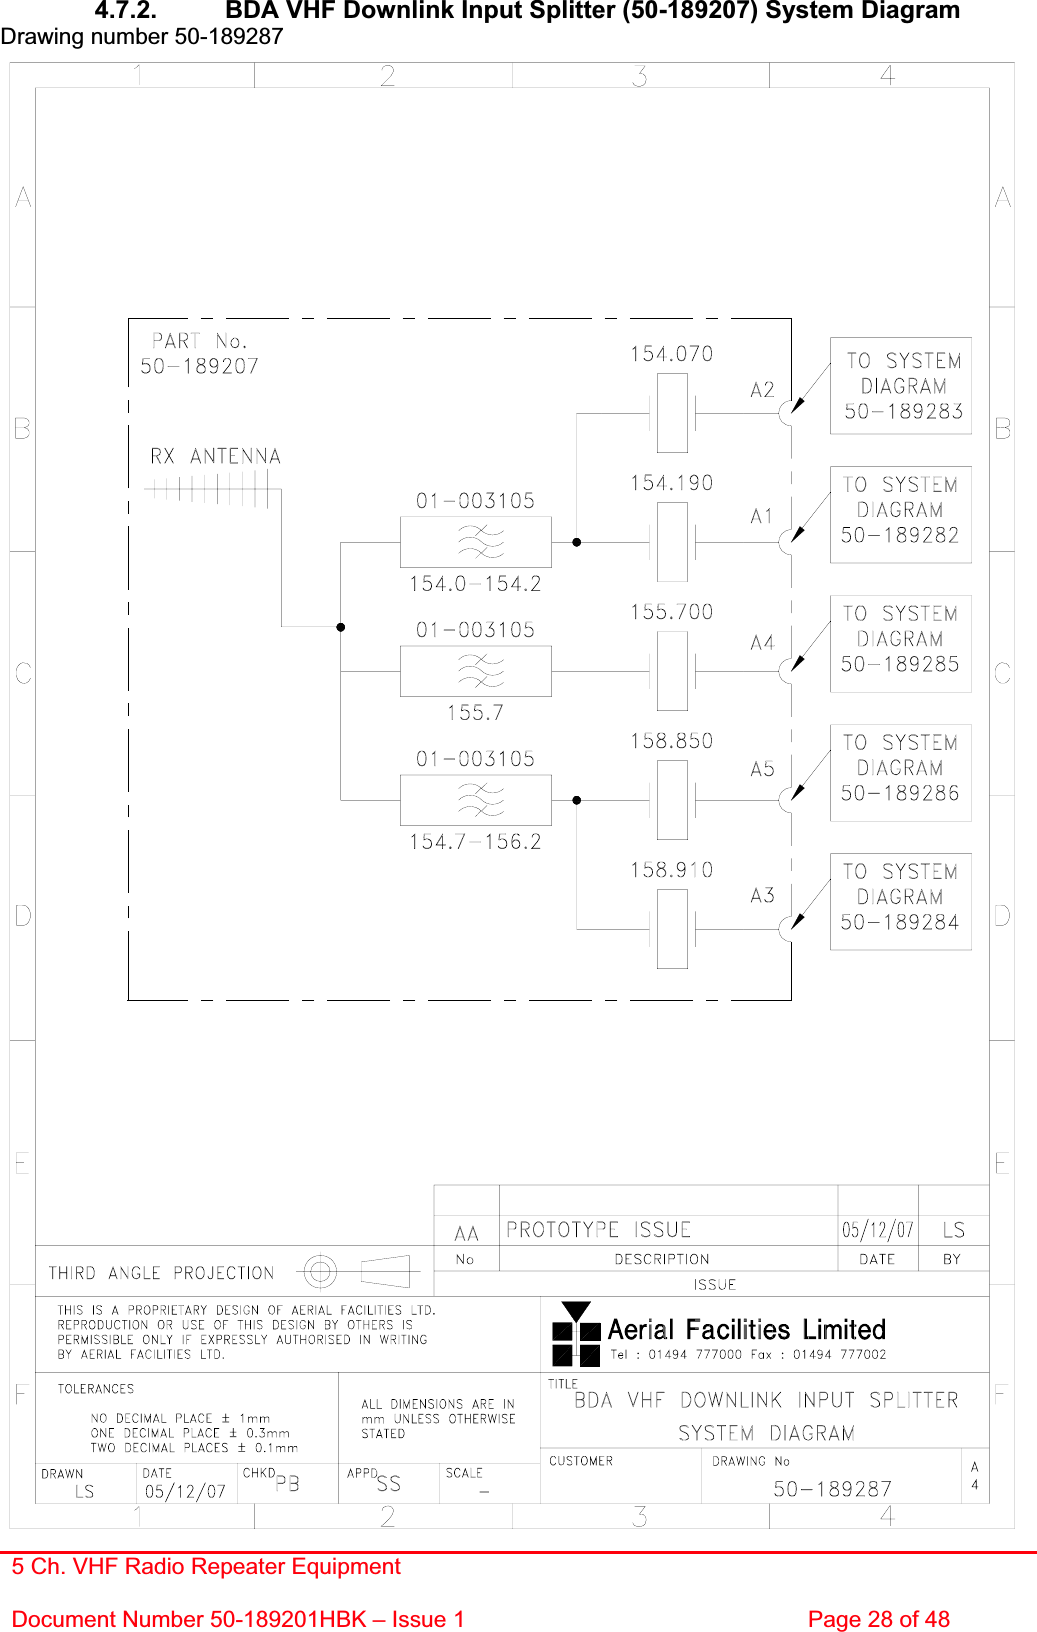 5 Ch. VHF Radio Repeater EquipmentDocument Number 50-189201HBK – Issue 1  Page 28 of 48 4.7.2.  BDA VHF Downlink Input Splitter (50-189207) System Diagram Drawing number 50-189287 